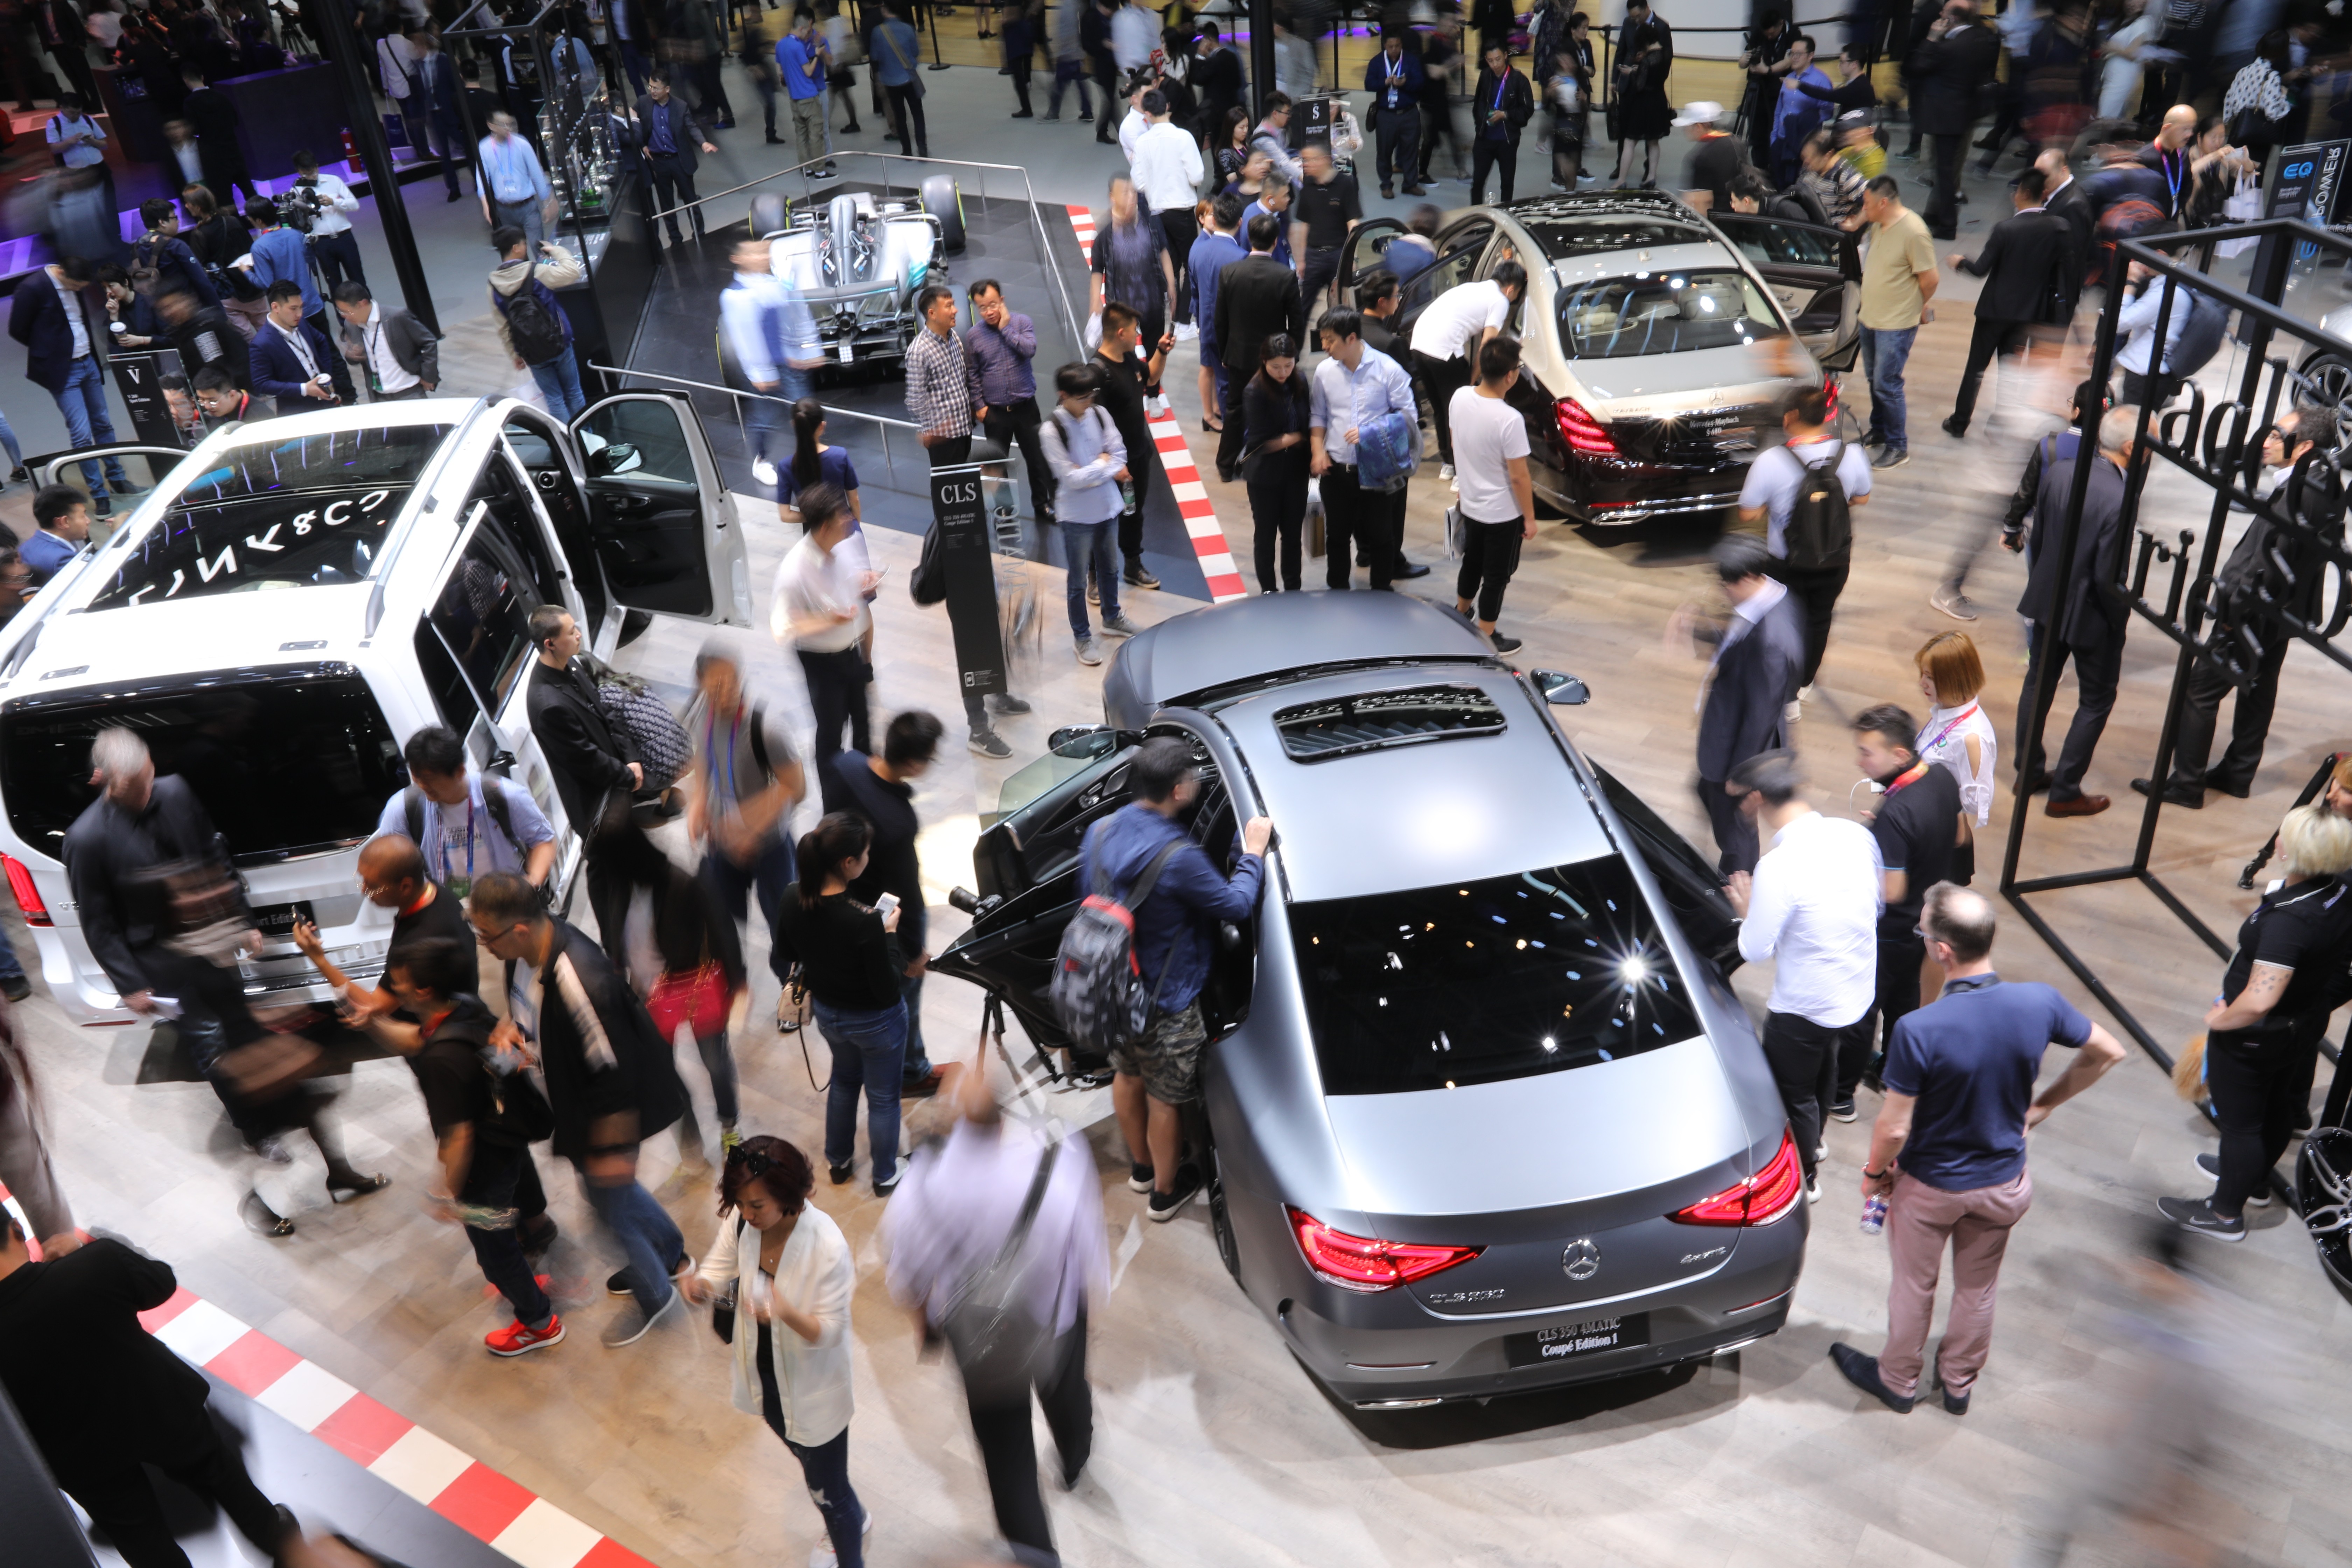 Visitors at the Auto China, which is being held in Beijing until May 4. The biennial car show is recognised as one of the most important automotive fairs in the world. Photo: Simon Song